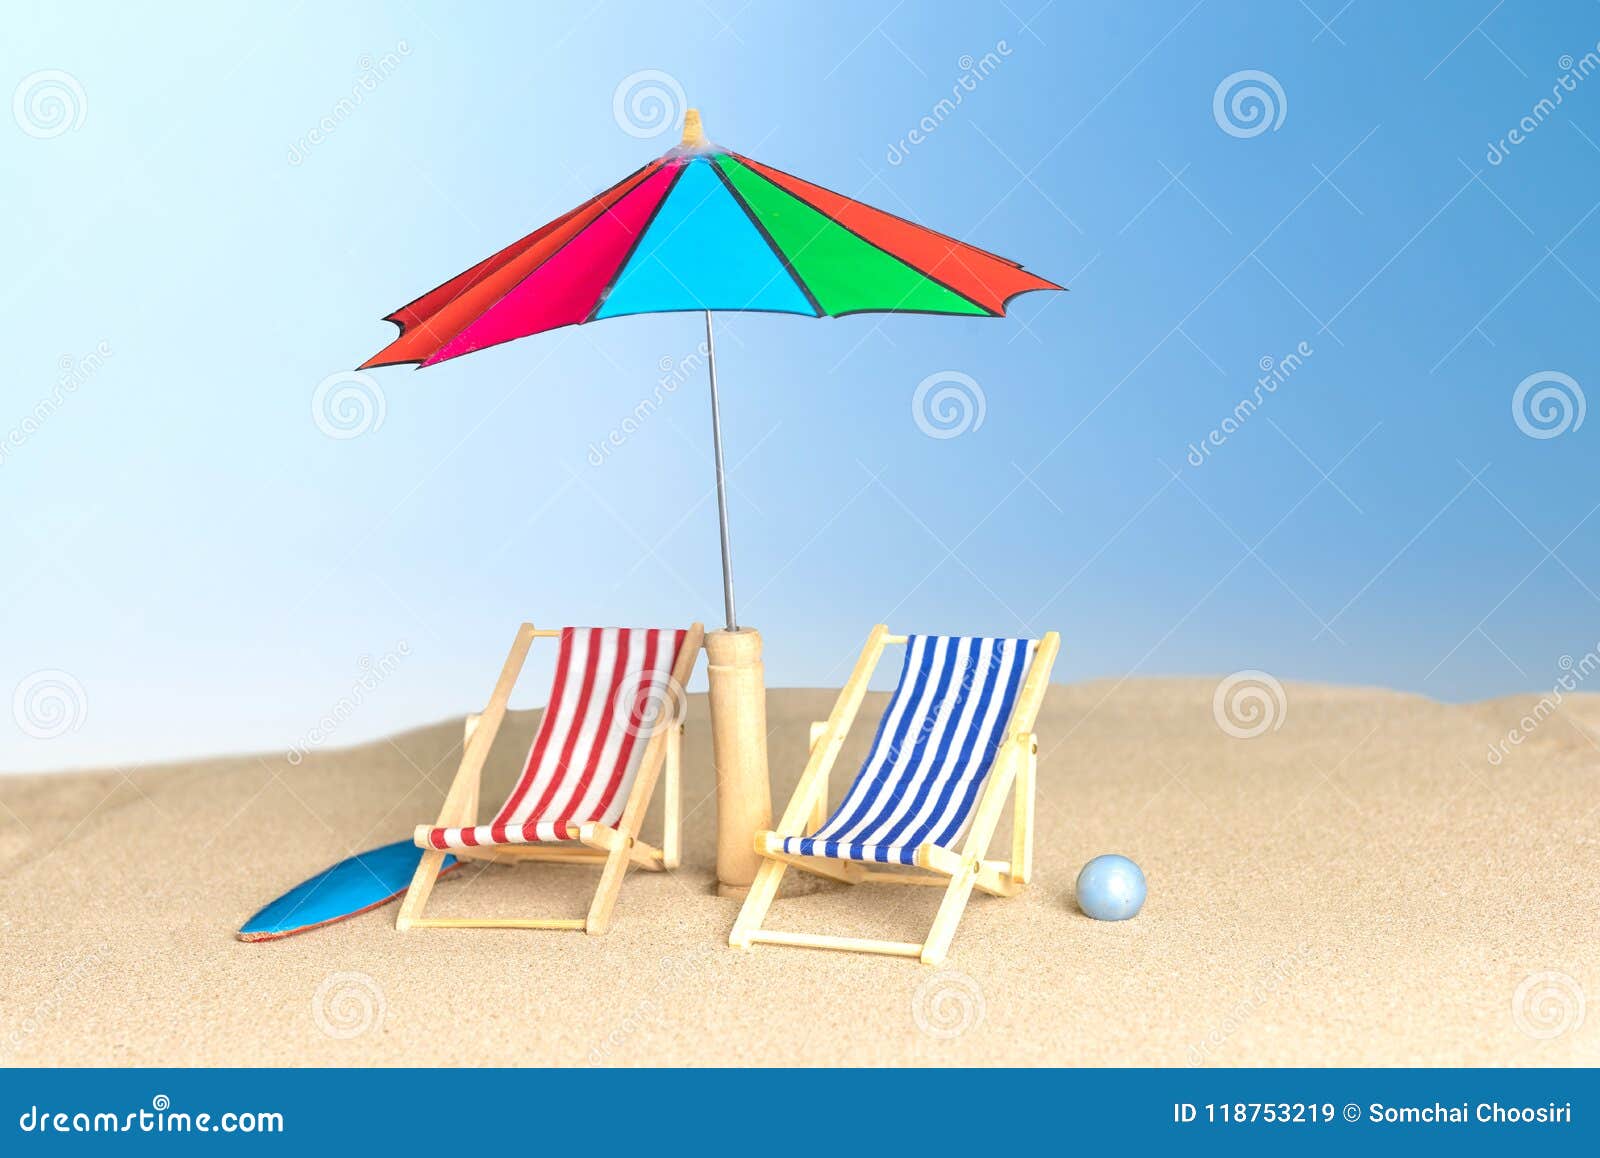 Beach Chairs And With Umbrella Stock Image Image Of Parasol